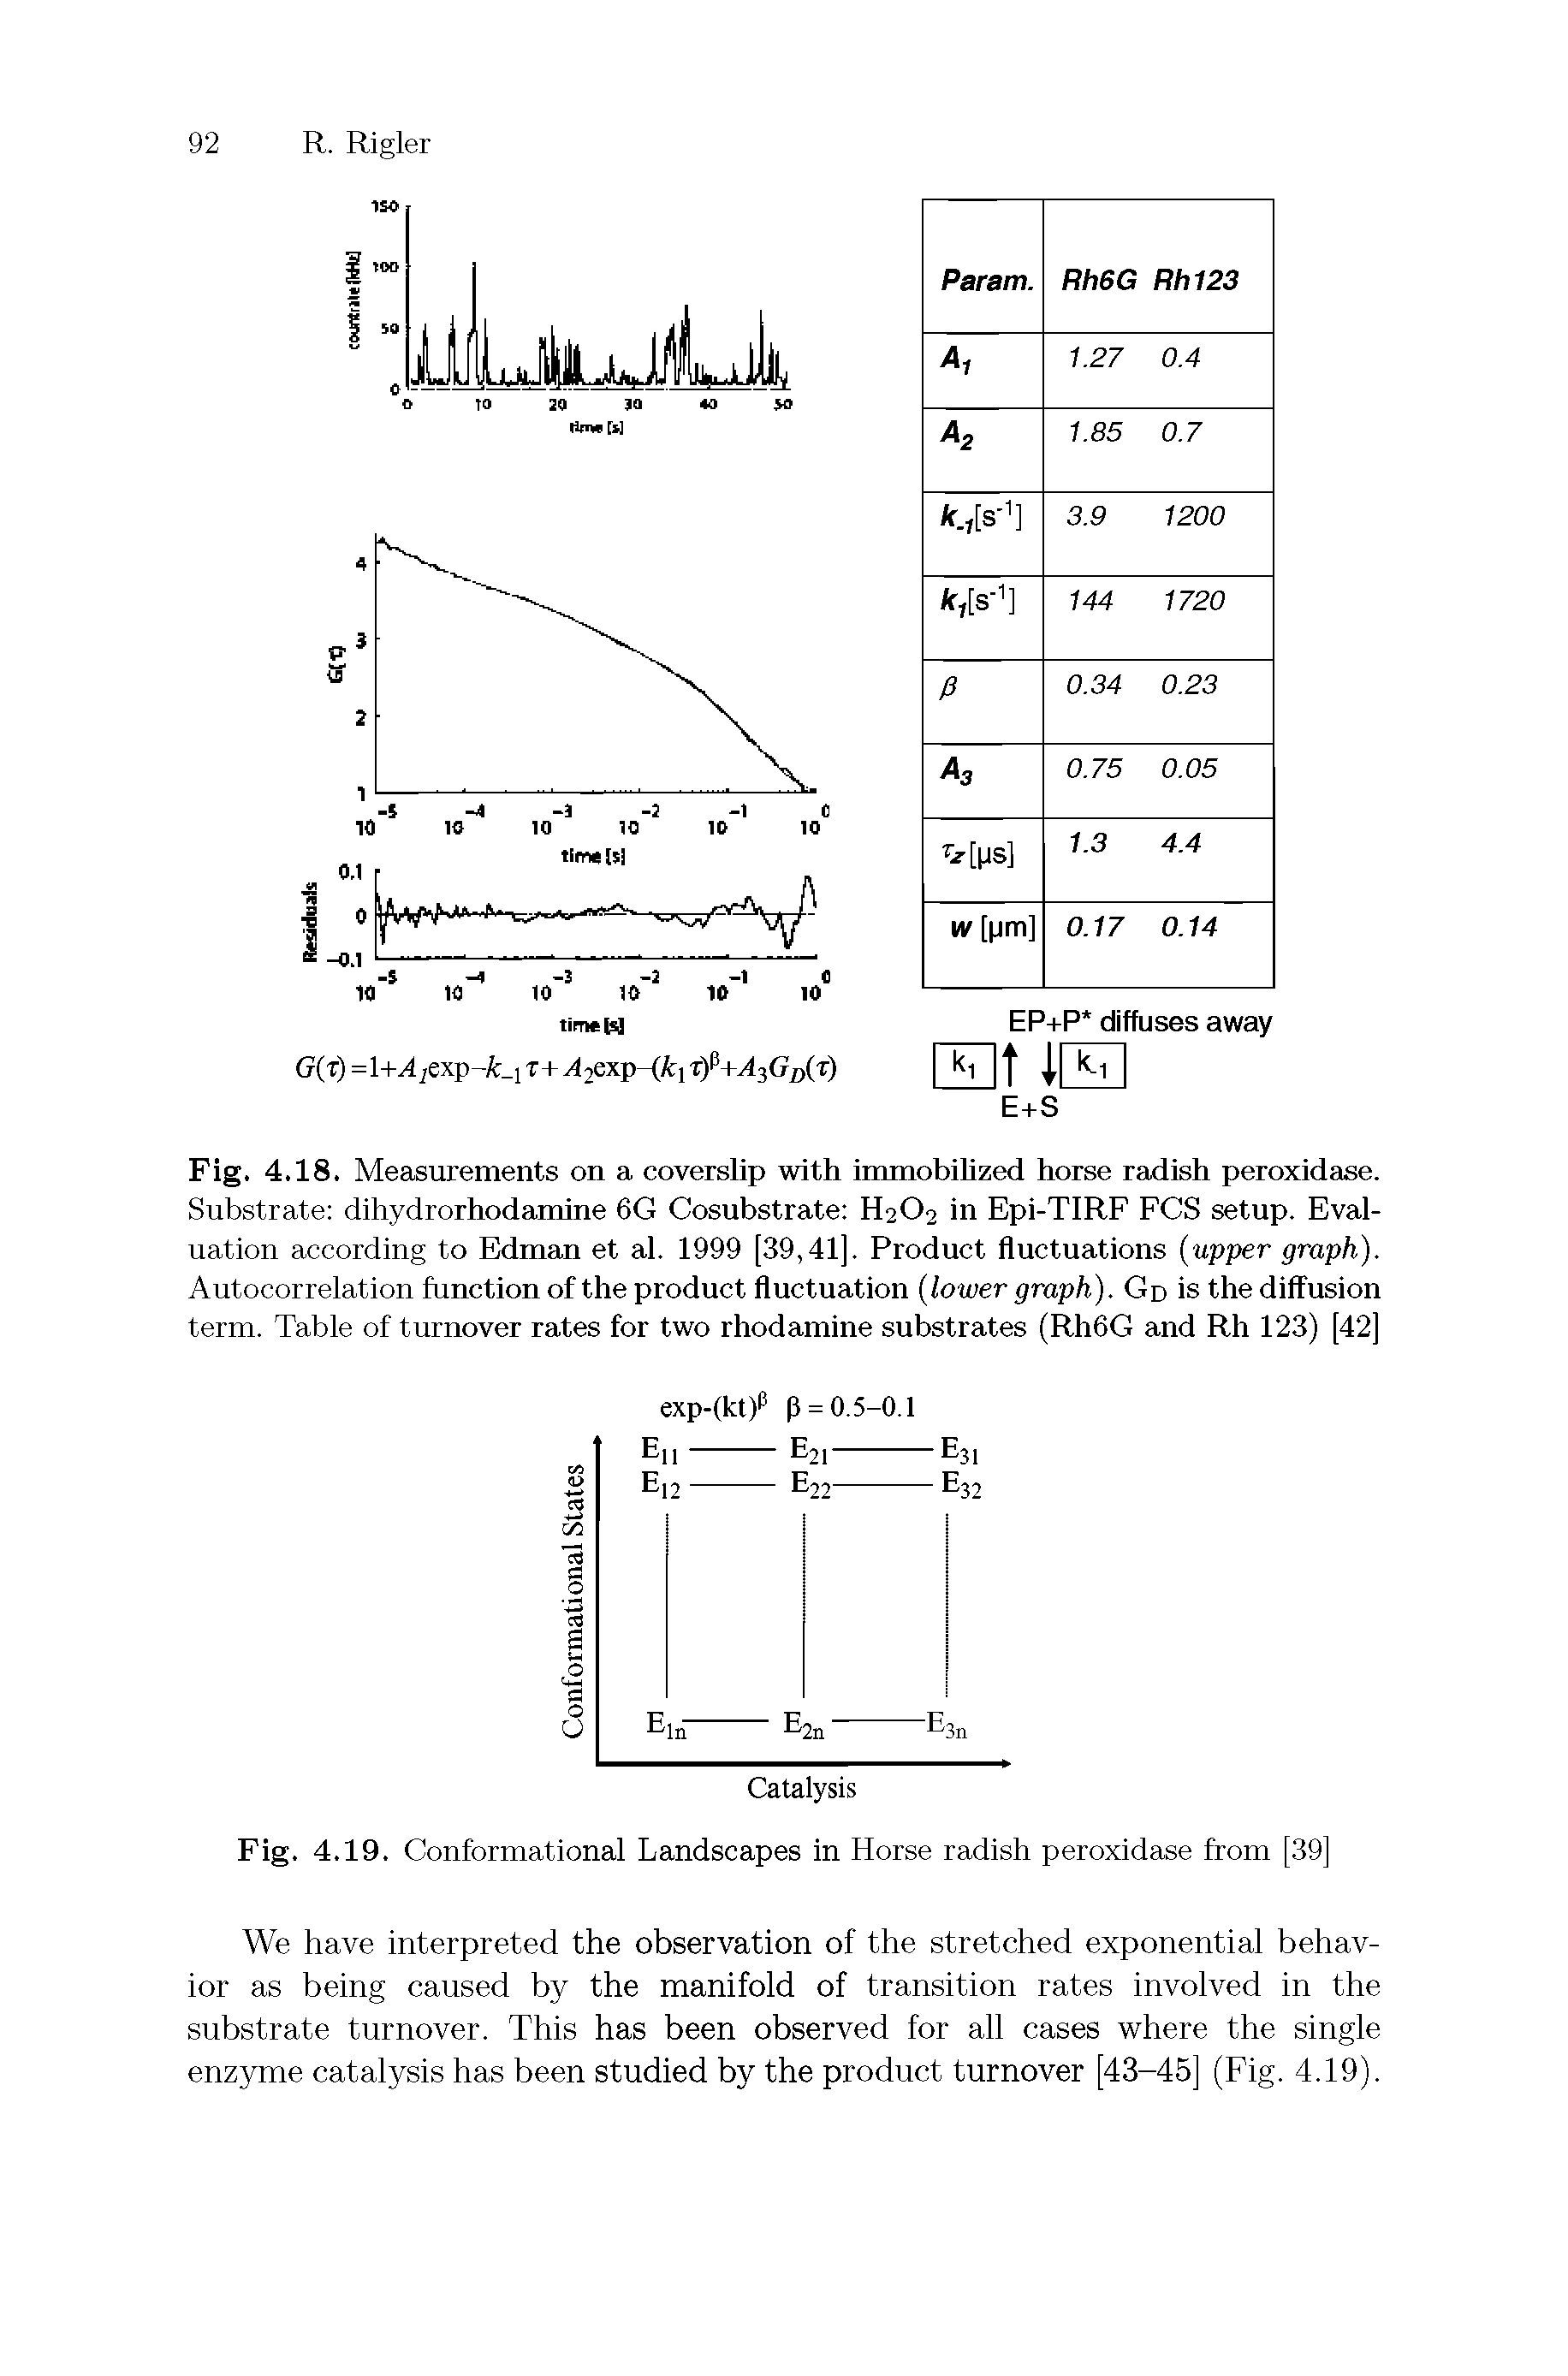 Fig. 4.18. Measurements on a coverslip with immobilized horse radish peroxidase. Substrate dihydrorhodamine 6G Cosubstrate H2O2 in Epi-TIRF PCS setup. Evai-uation according to Edman et ai. 1999 [39,41]. Product fluctuations (upper graph). Autocorrelation function of the product fluctuation (lower graph). Gd is the diffusion term. Table of turnover rates for two rhodamine substrates (Rh6G and Rh 123) [42]...